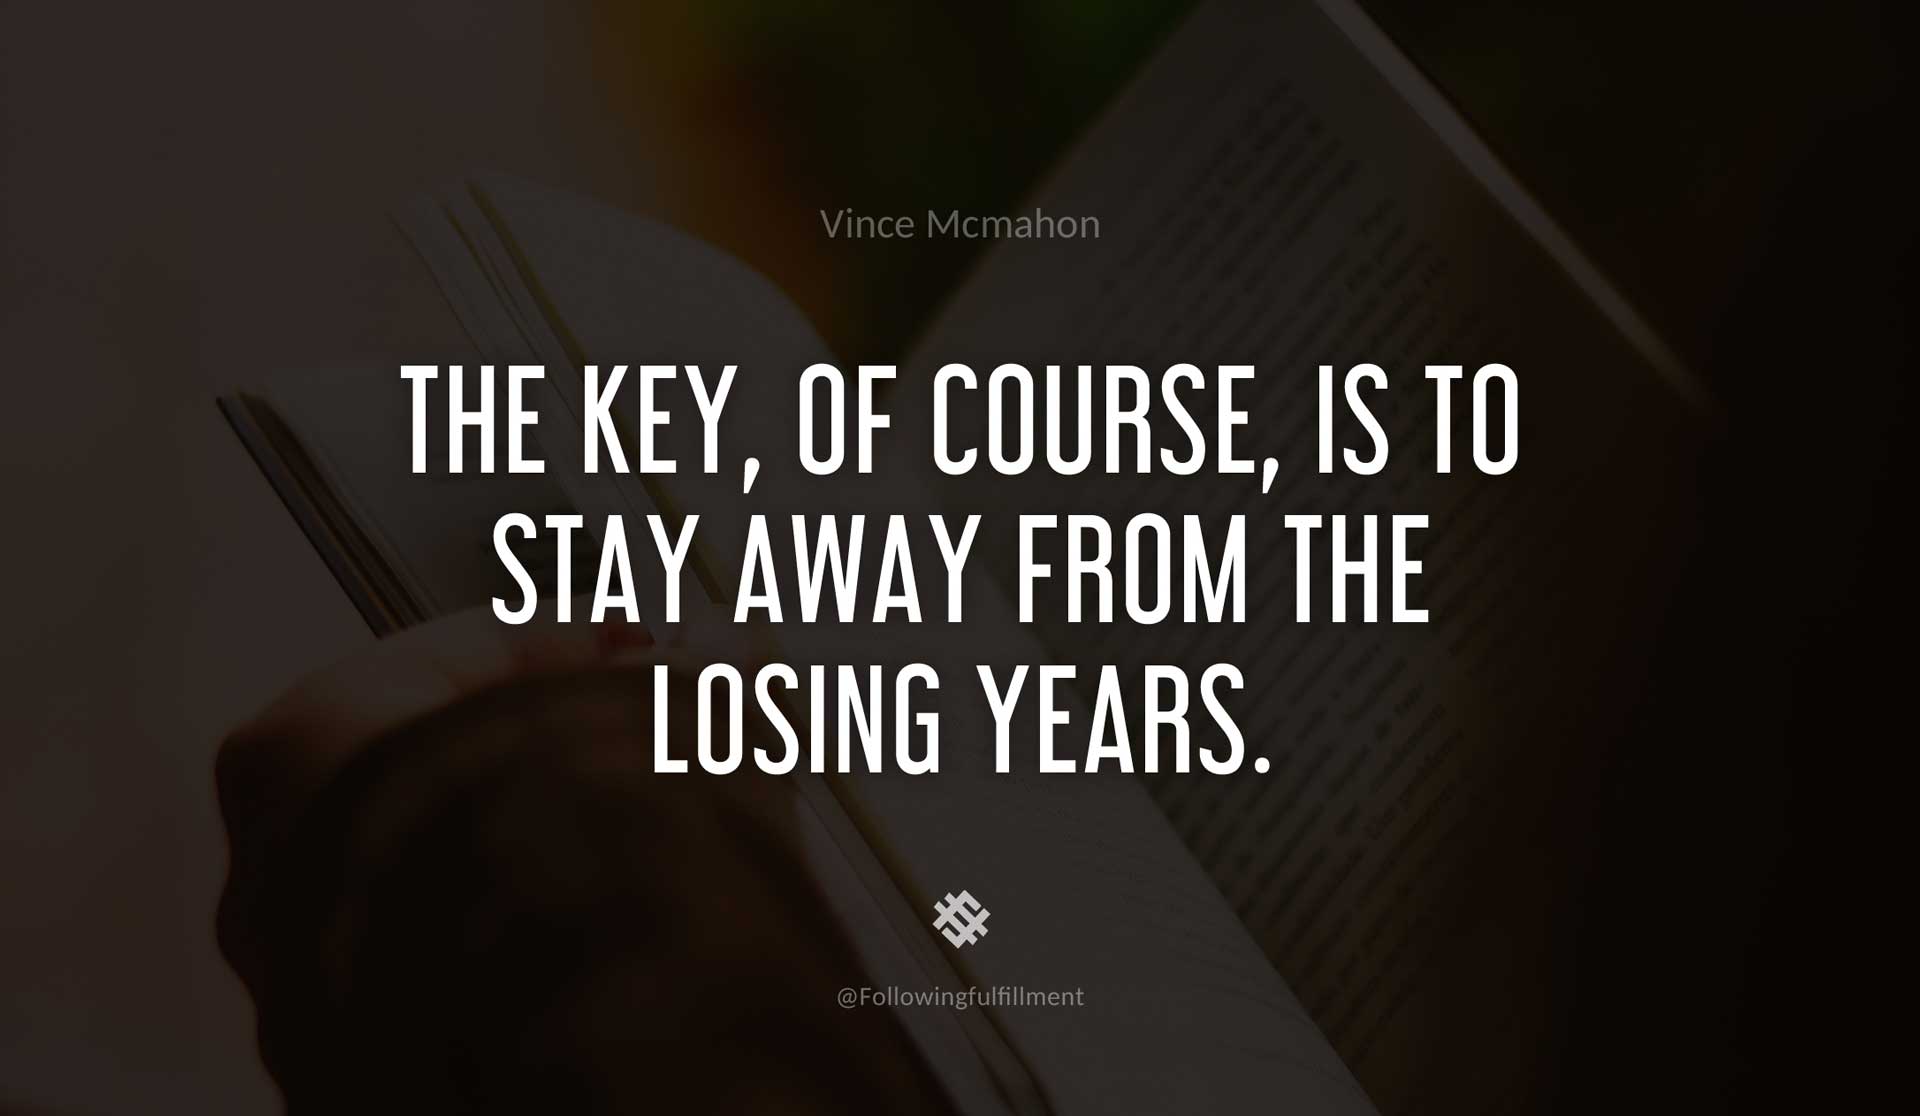 The-key,-of-course,-is-to-stay-away-from-the-losing-years.-VINCE-MCMAHON-Quote.jpg